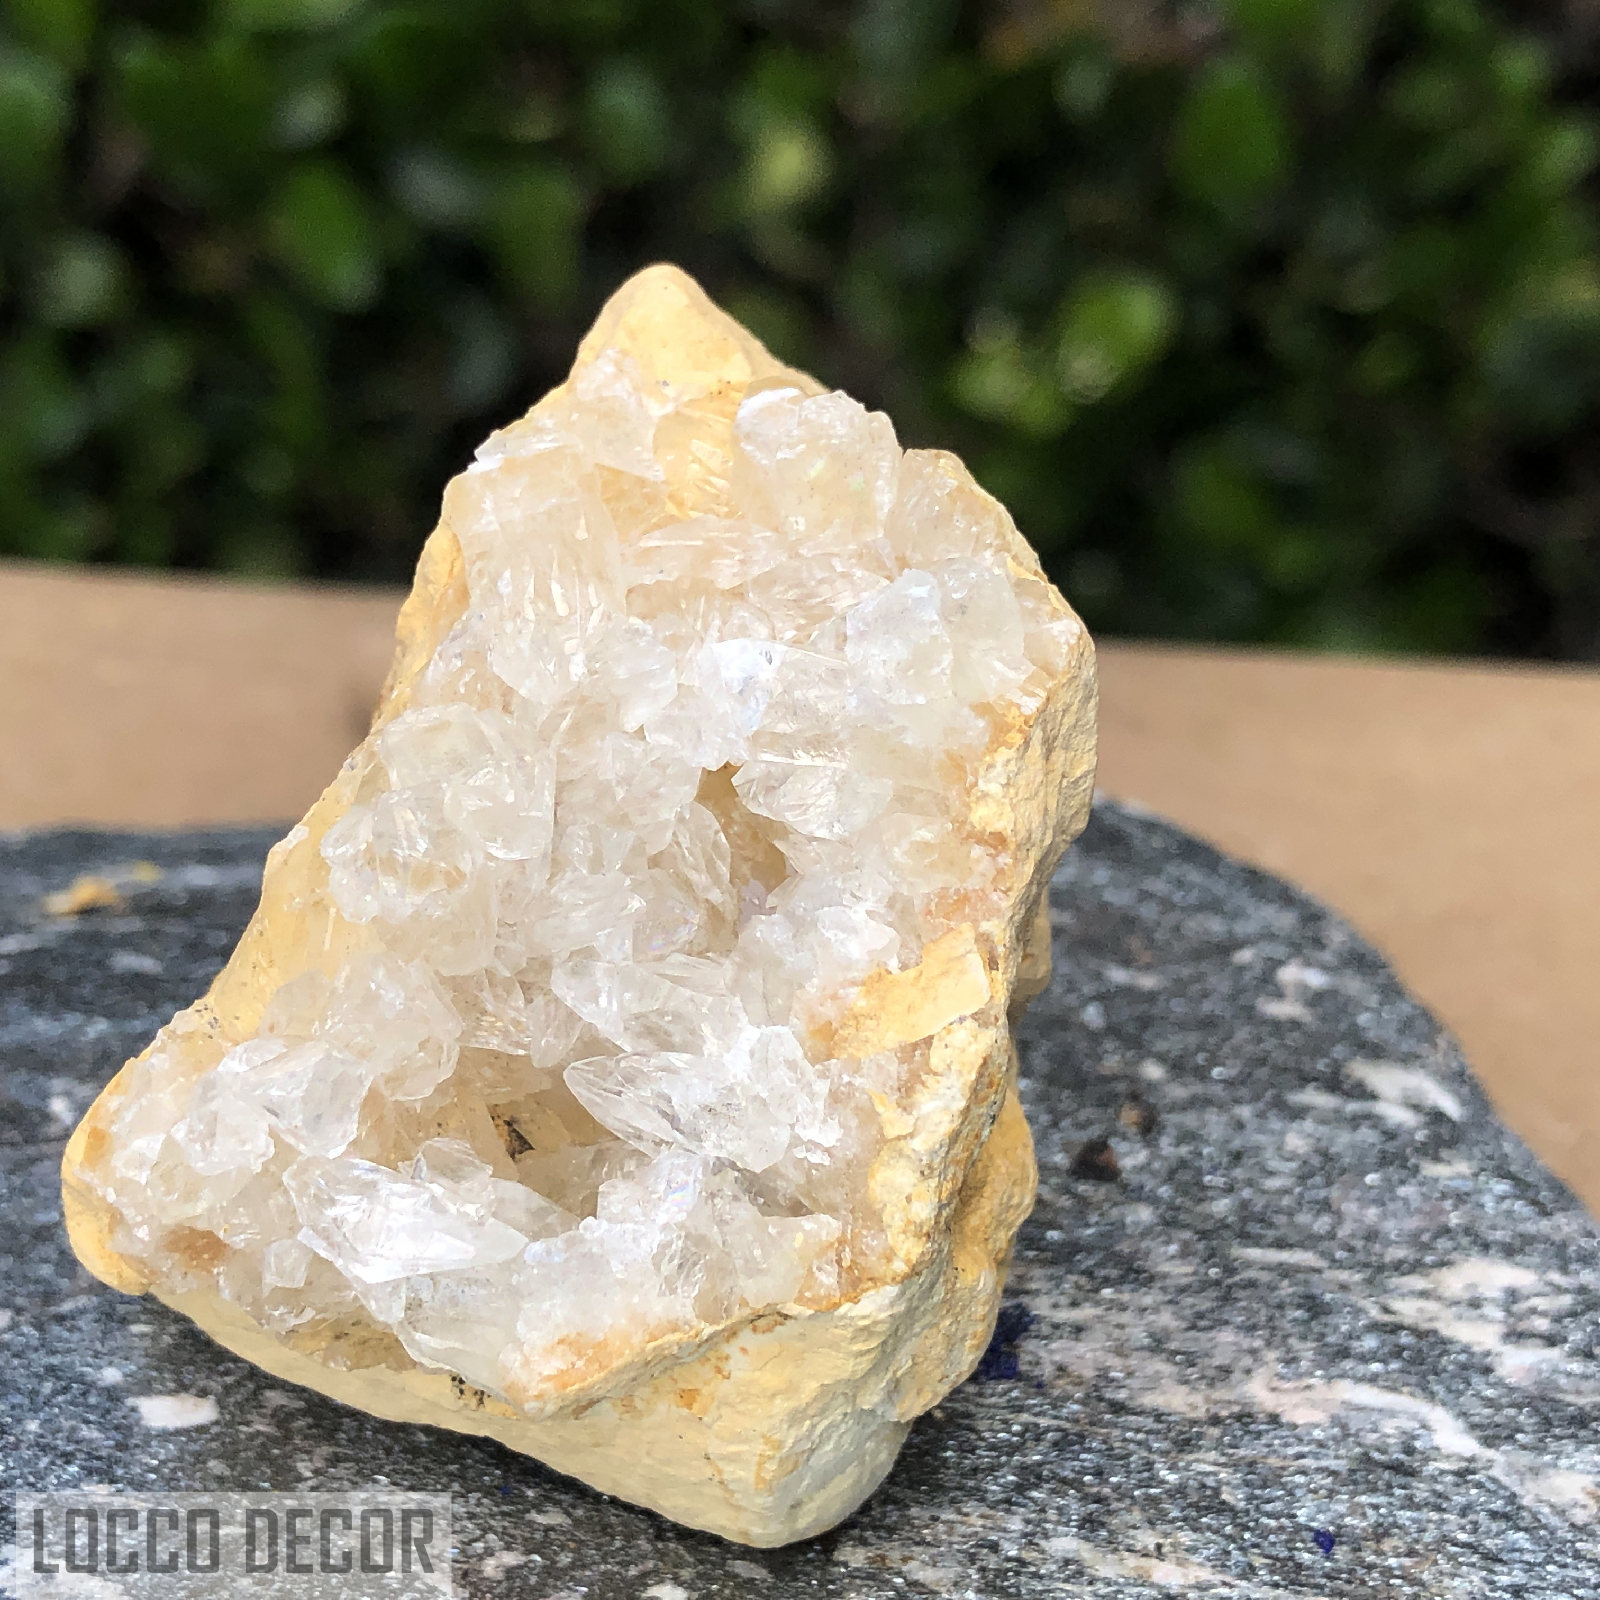 86g 5x7x6cm Clear Clear Calcite Geode from Mexico